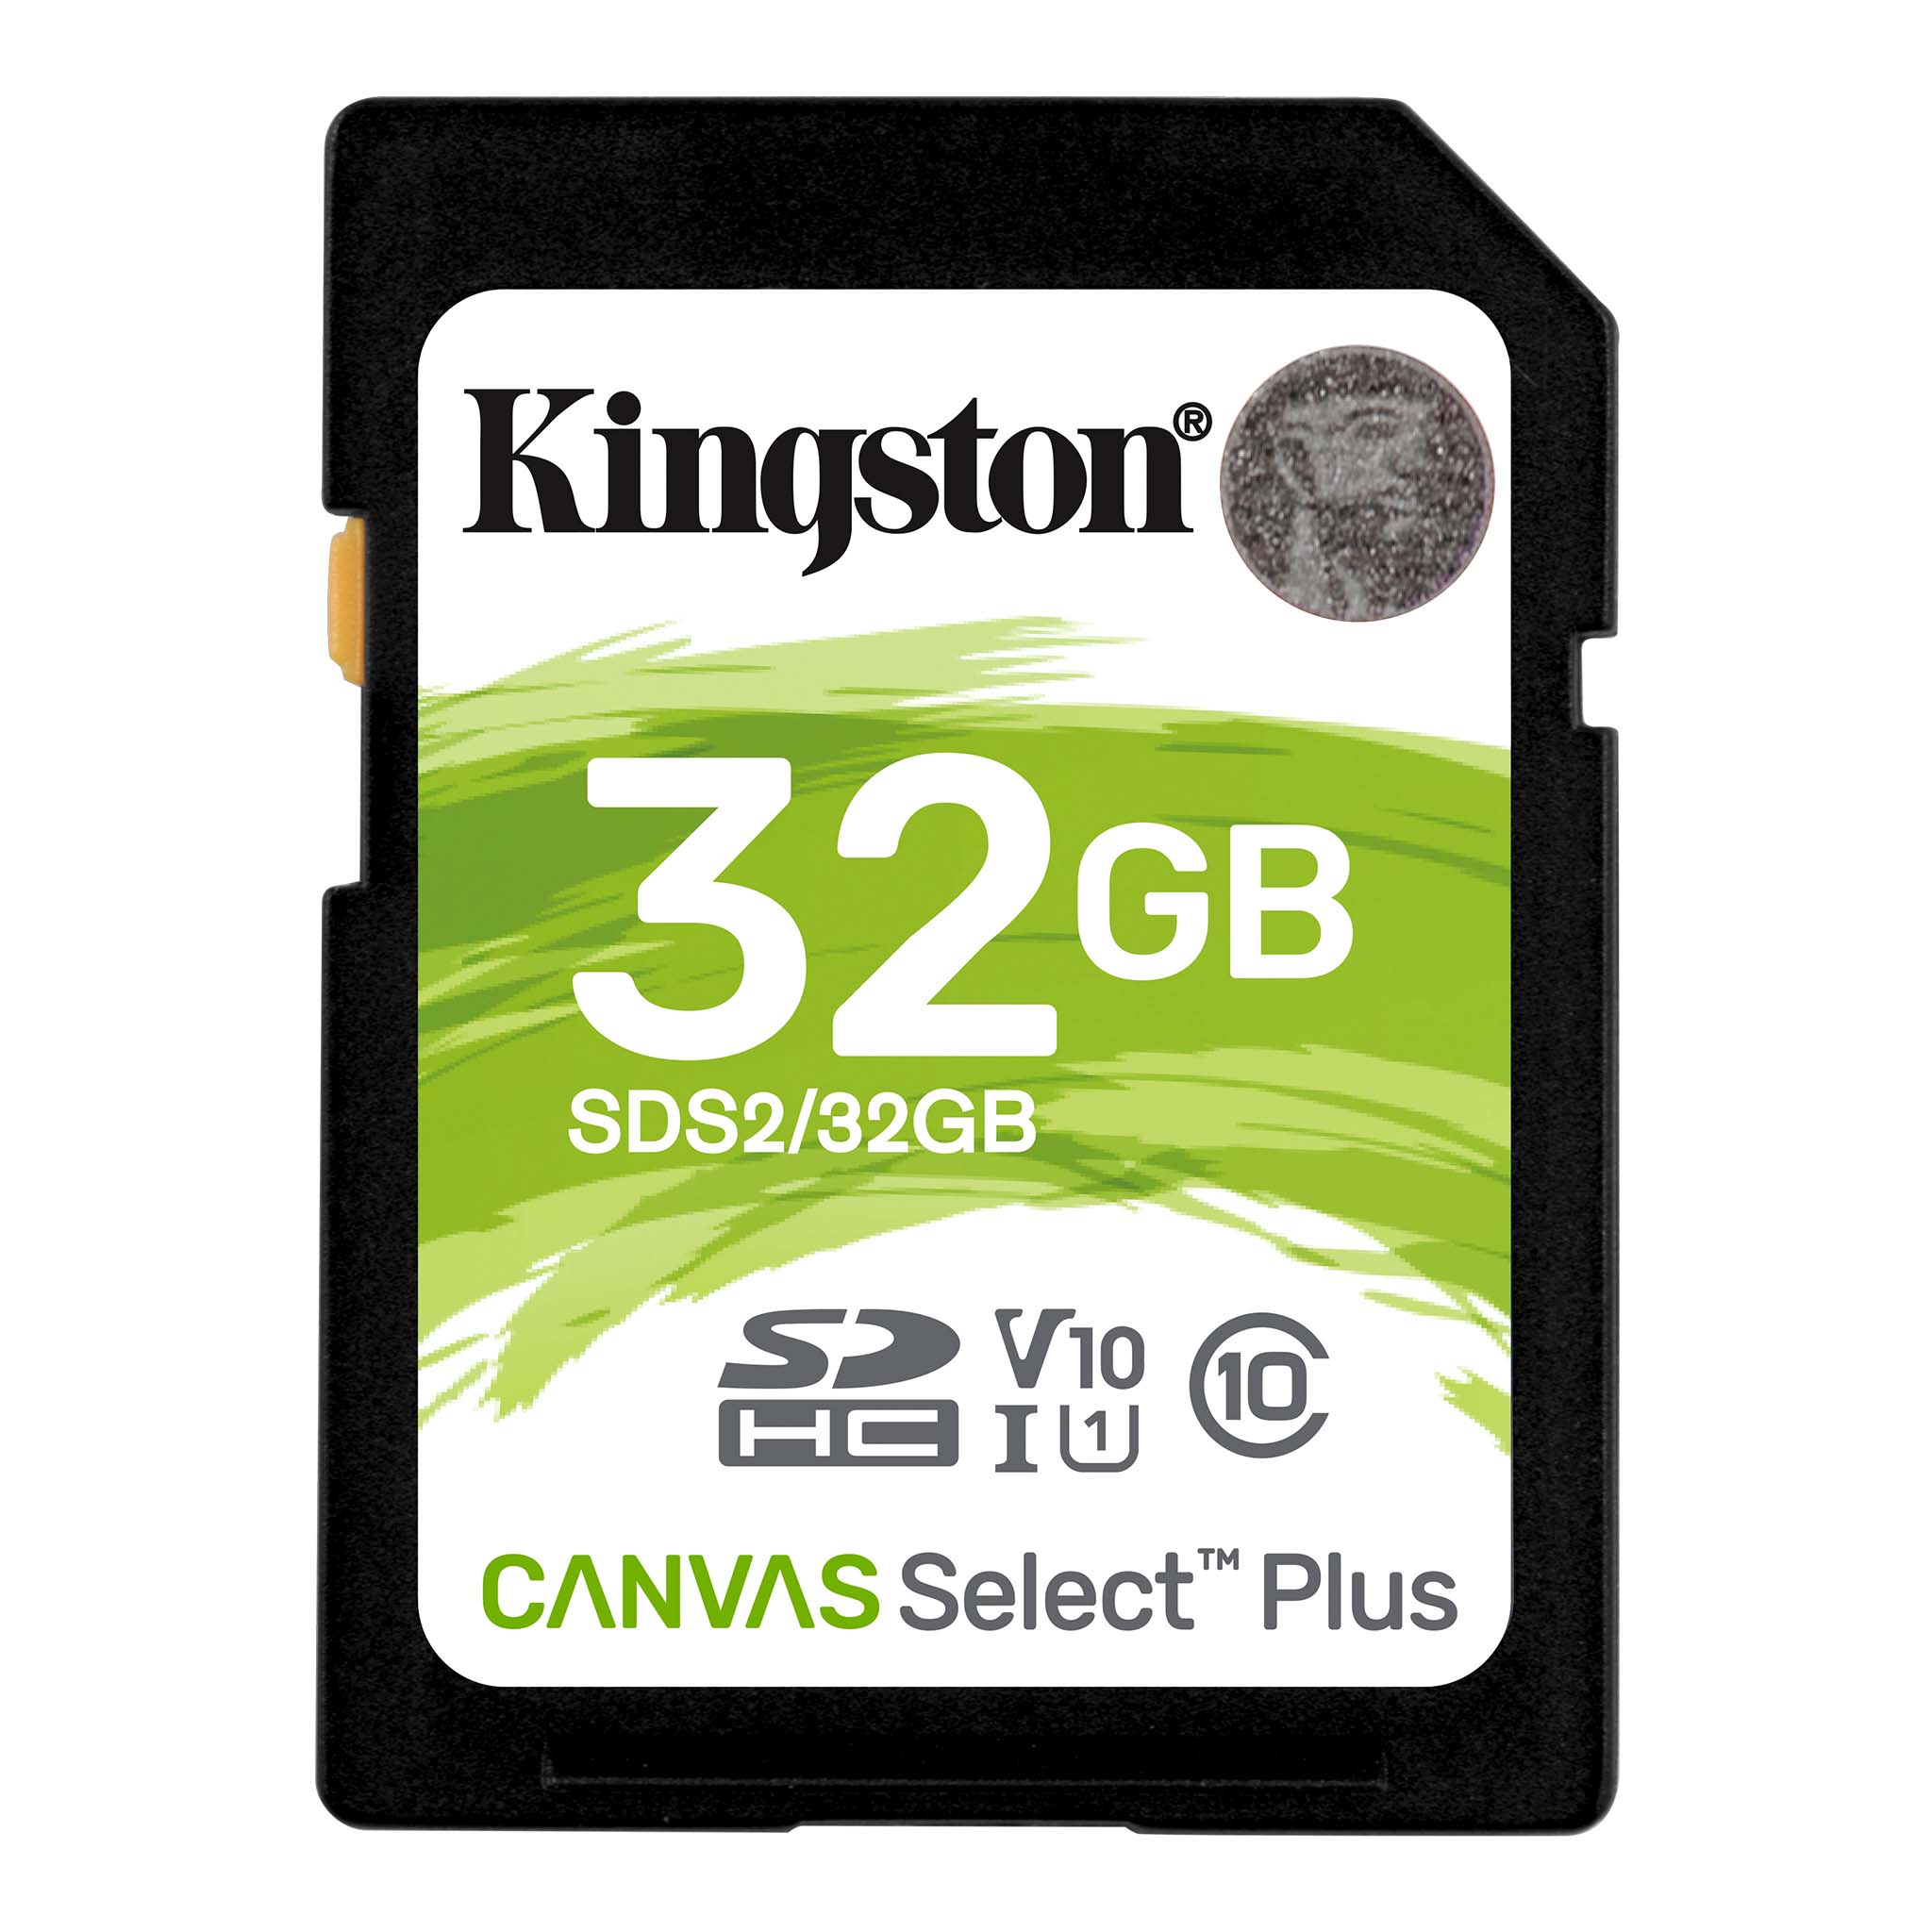 100MBs Works with Kingston Kingston 32GB Huawei Mate S 32GB MicroSDHC Canvas Select Plus Card Verified by SanFlash. 